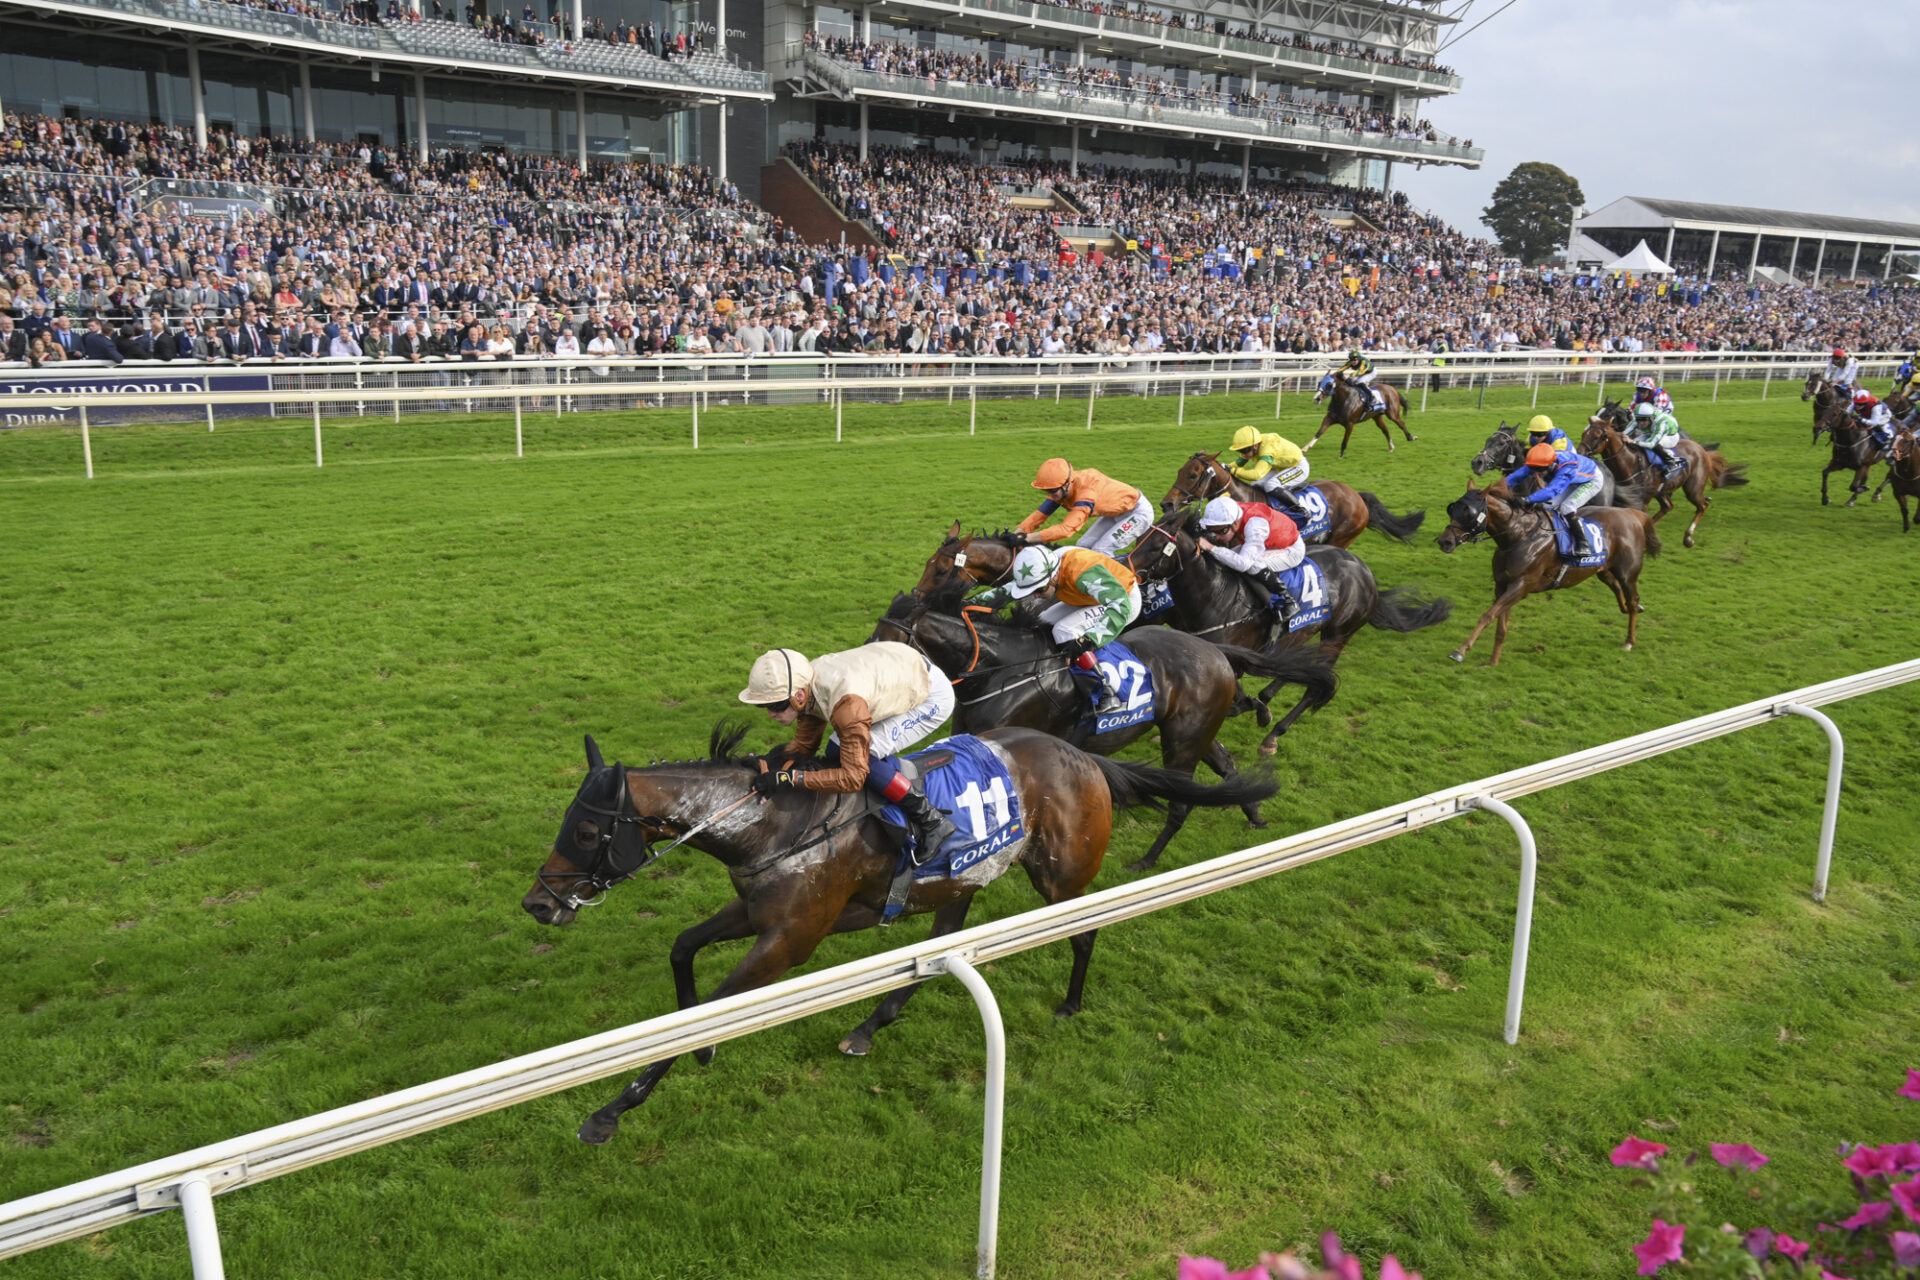 YORK RACECOURSE PRIZE MONEY SET AT A RECORD £10.75 MILLION Yorkshire Racing News Go Racing photo picture